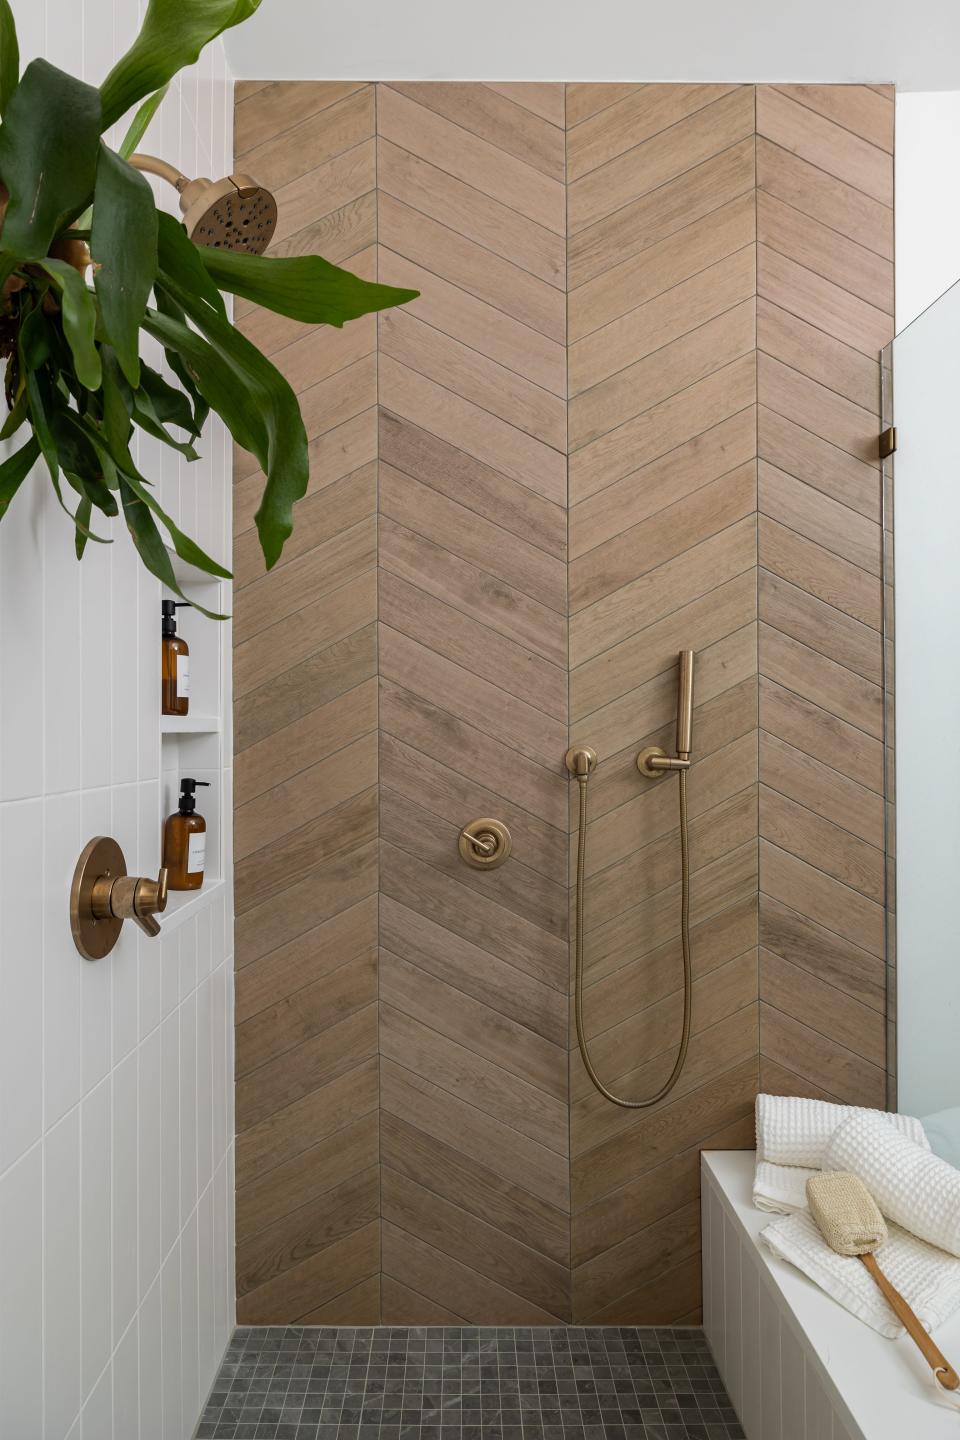 A faux wood tile wall in a chevron lay pattern brings neutral tones into the shower in this renovated home.